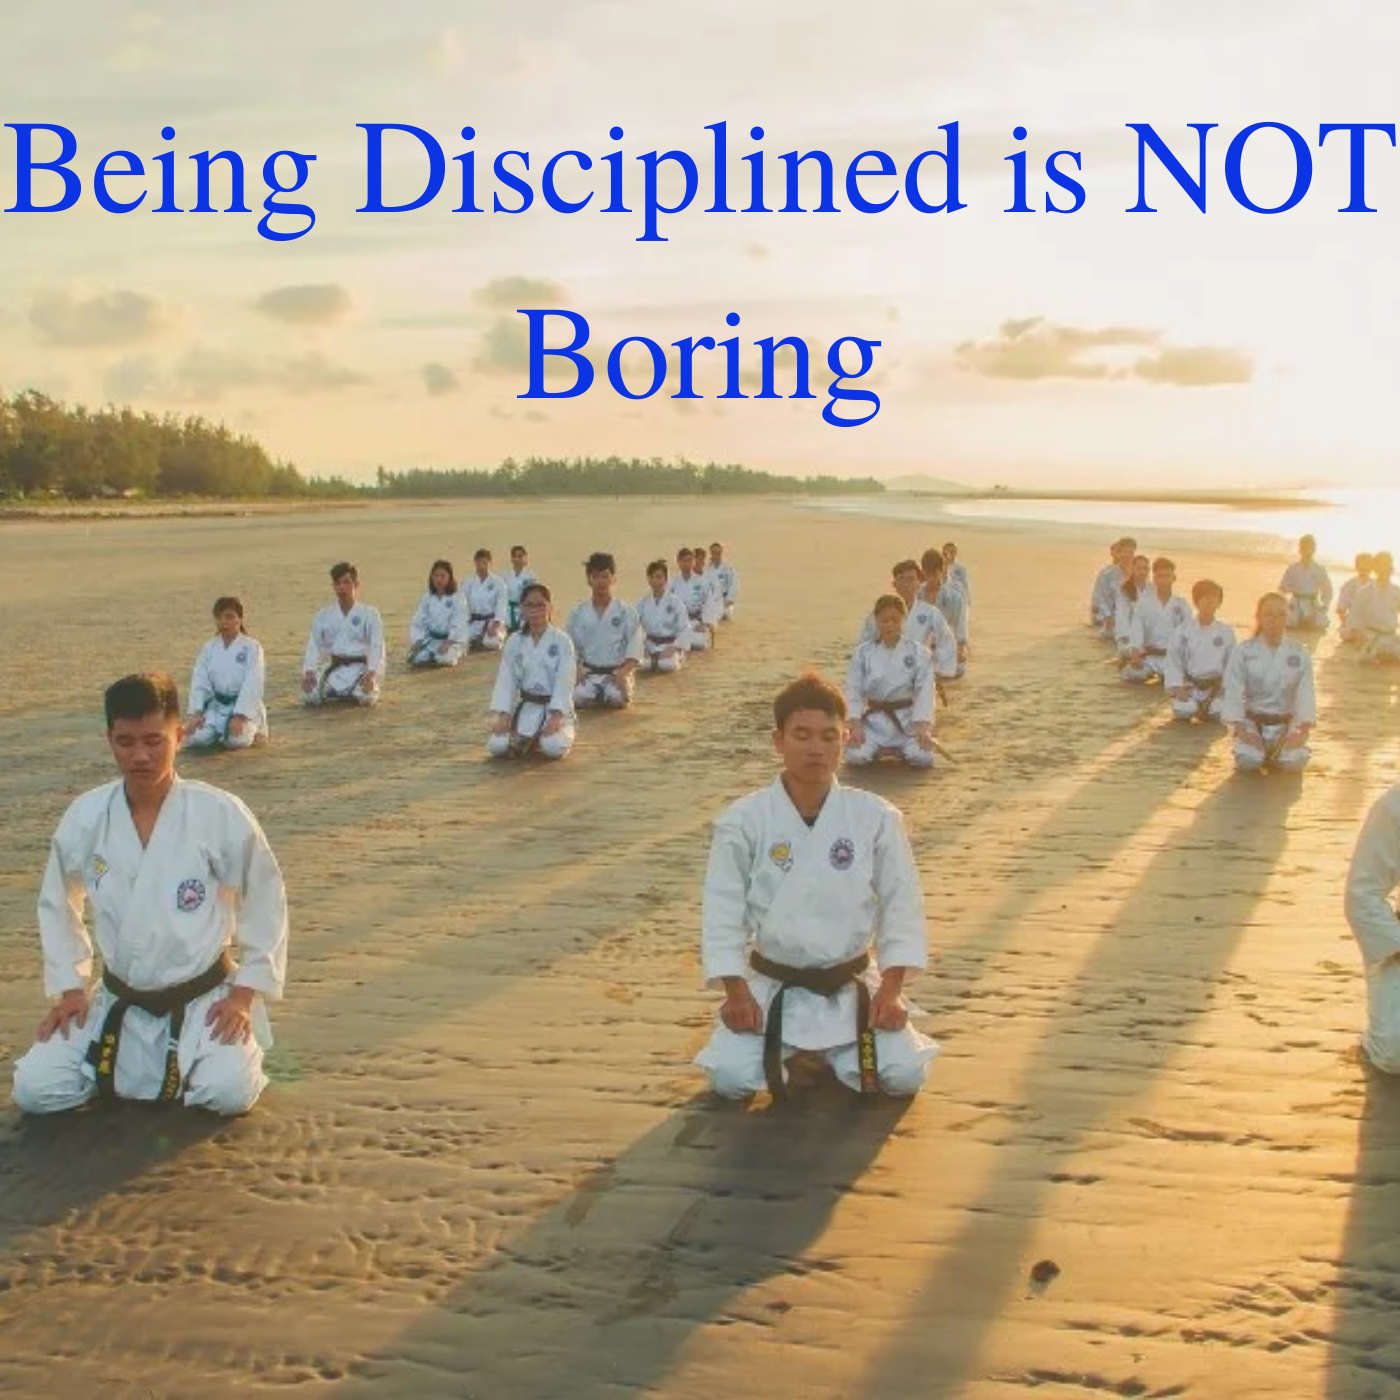 Being Disciplined is NOT Boring